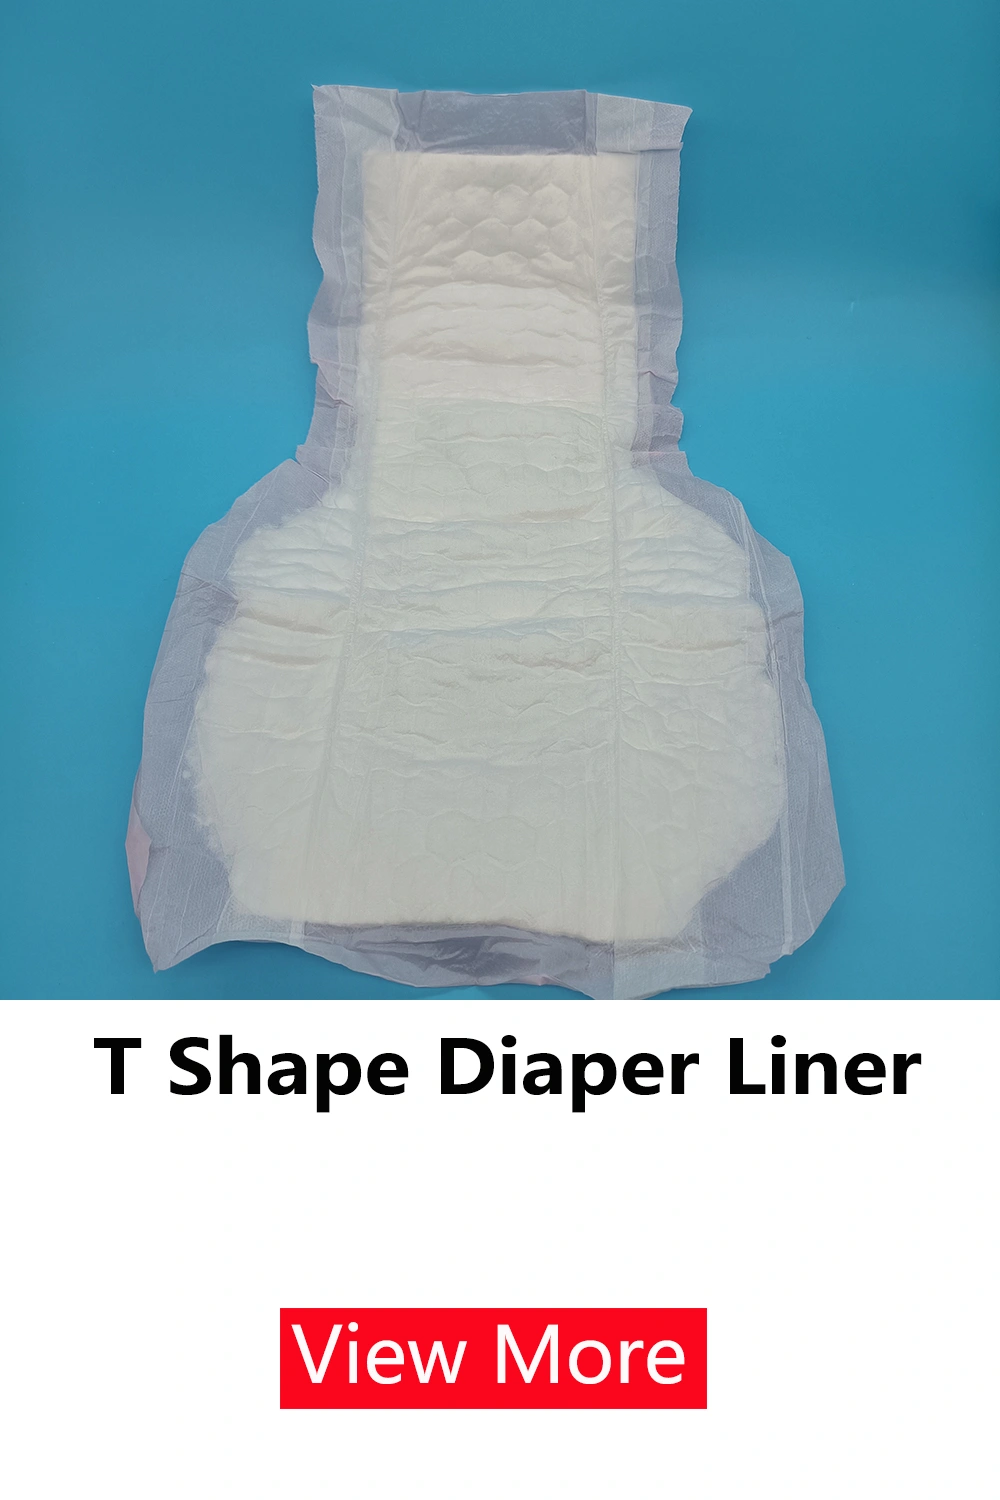 Bed pad related product T shape diaper liner picture